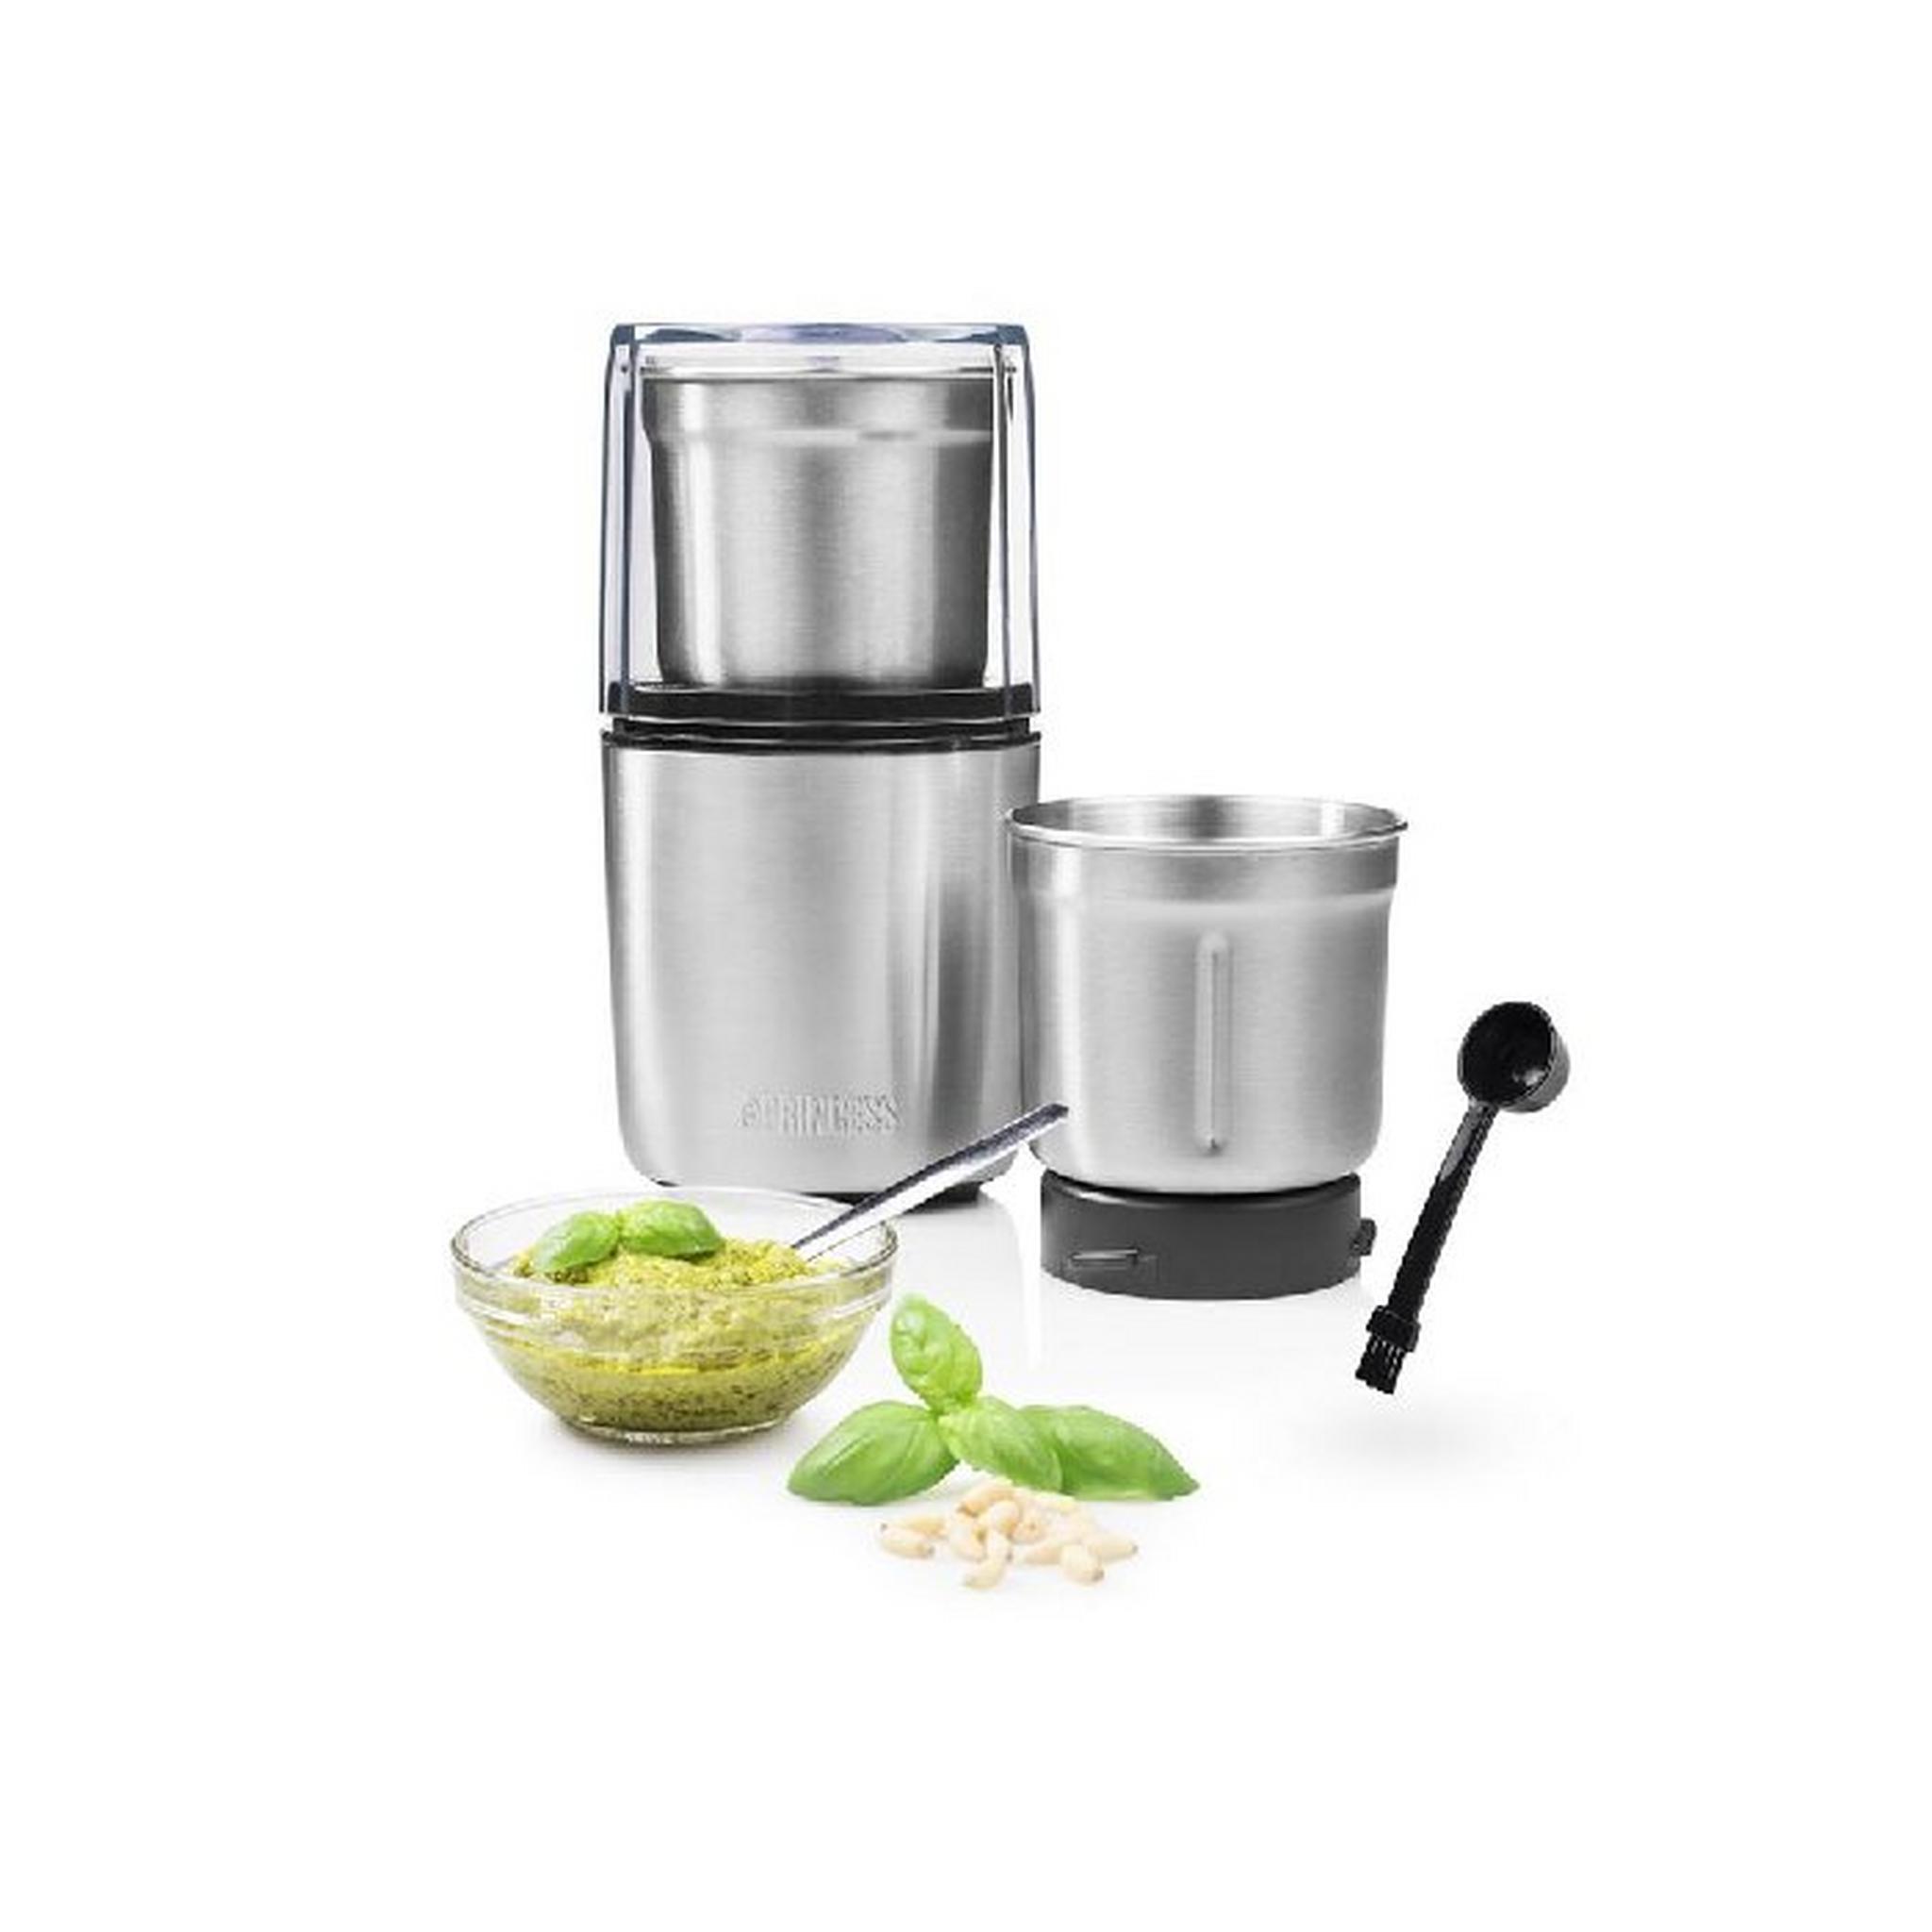 Princess Multi Chopper and Grinder, 200W, 1.5 L - Stainless Steel